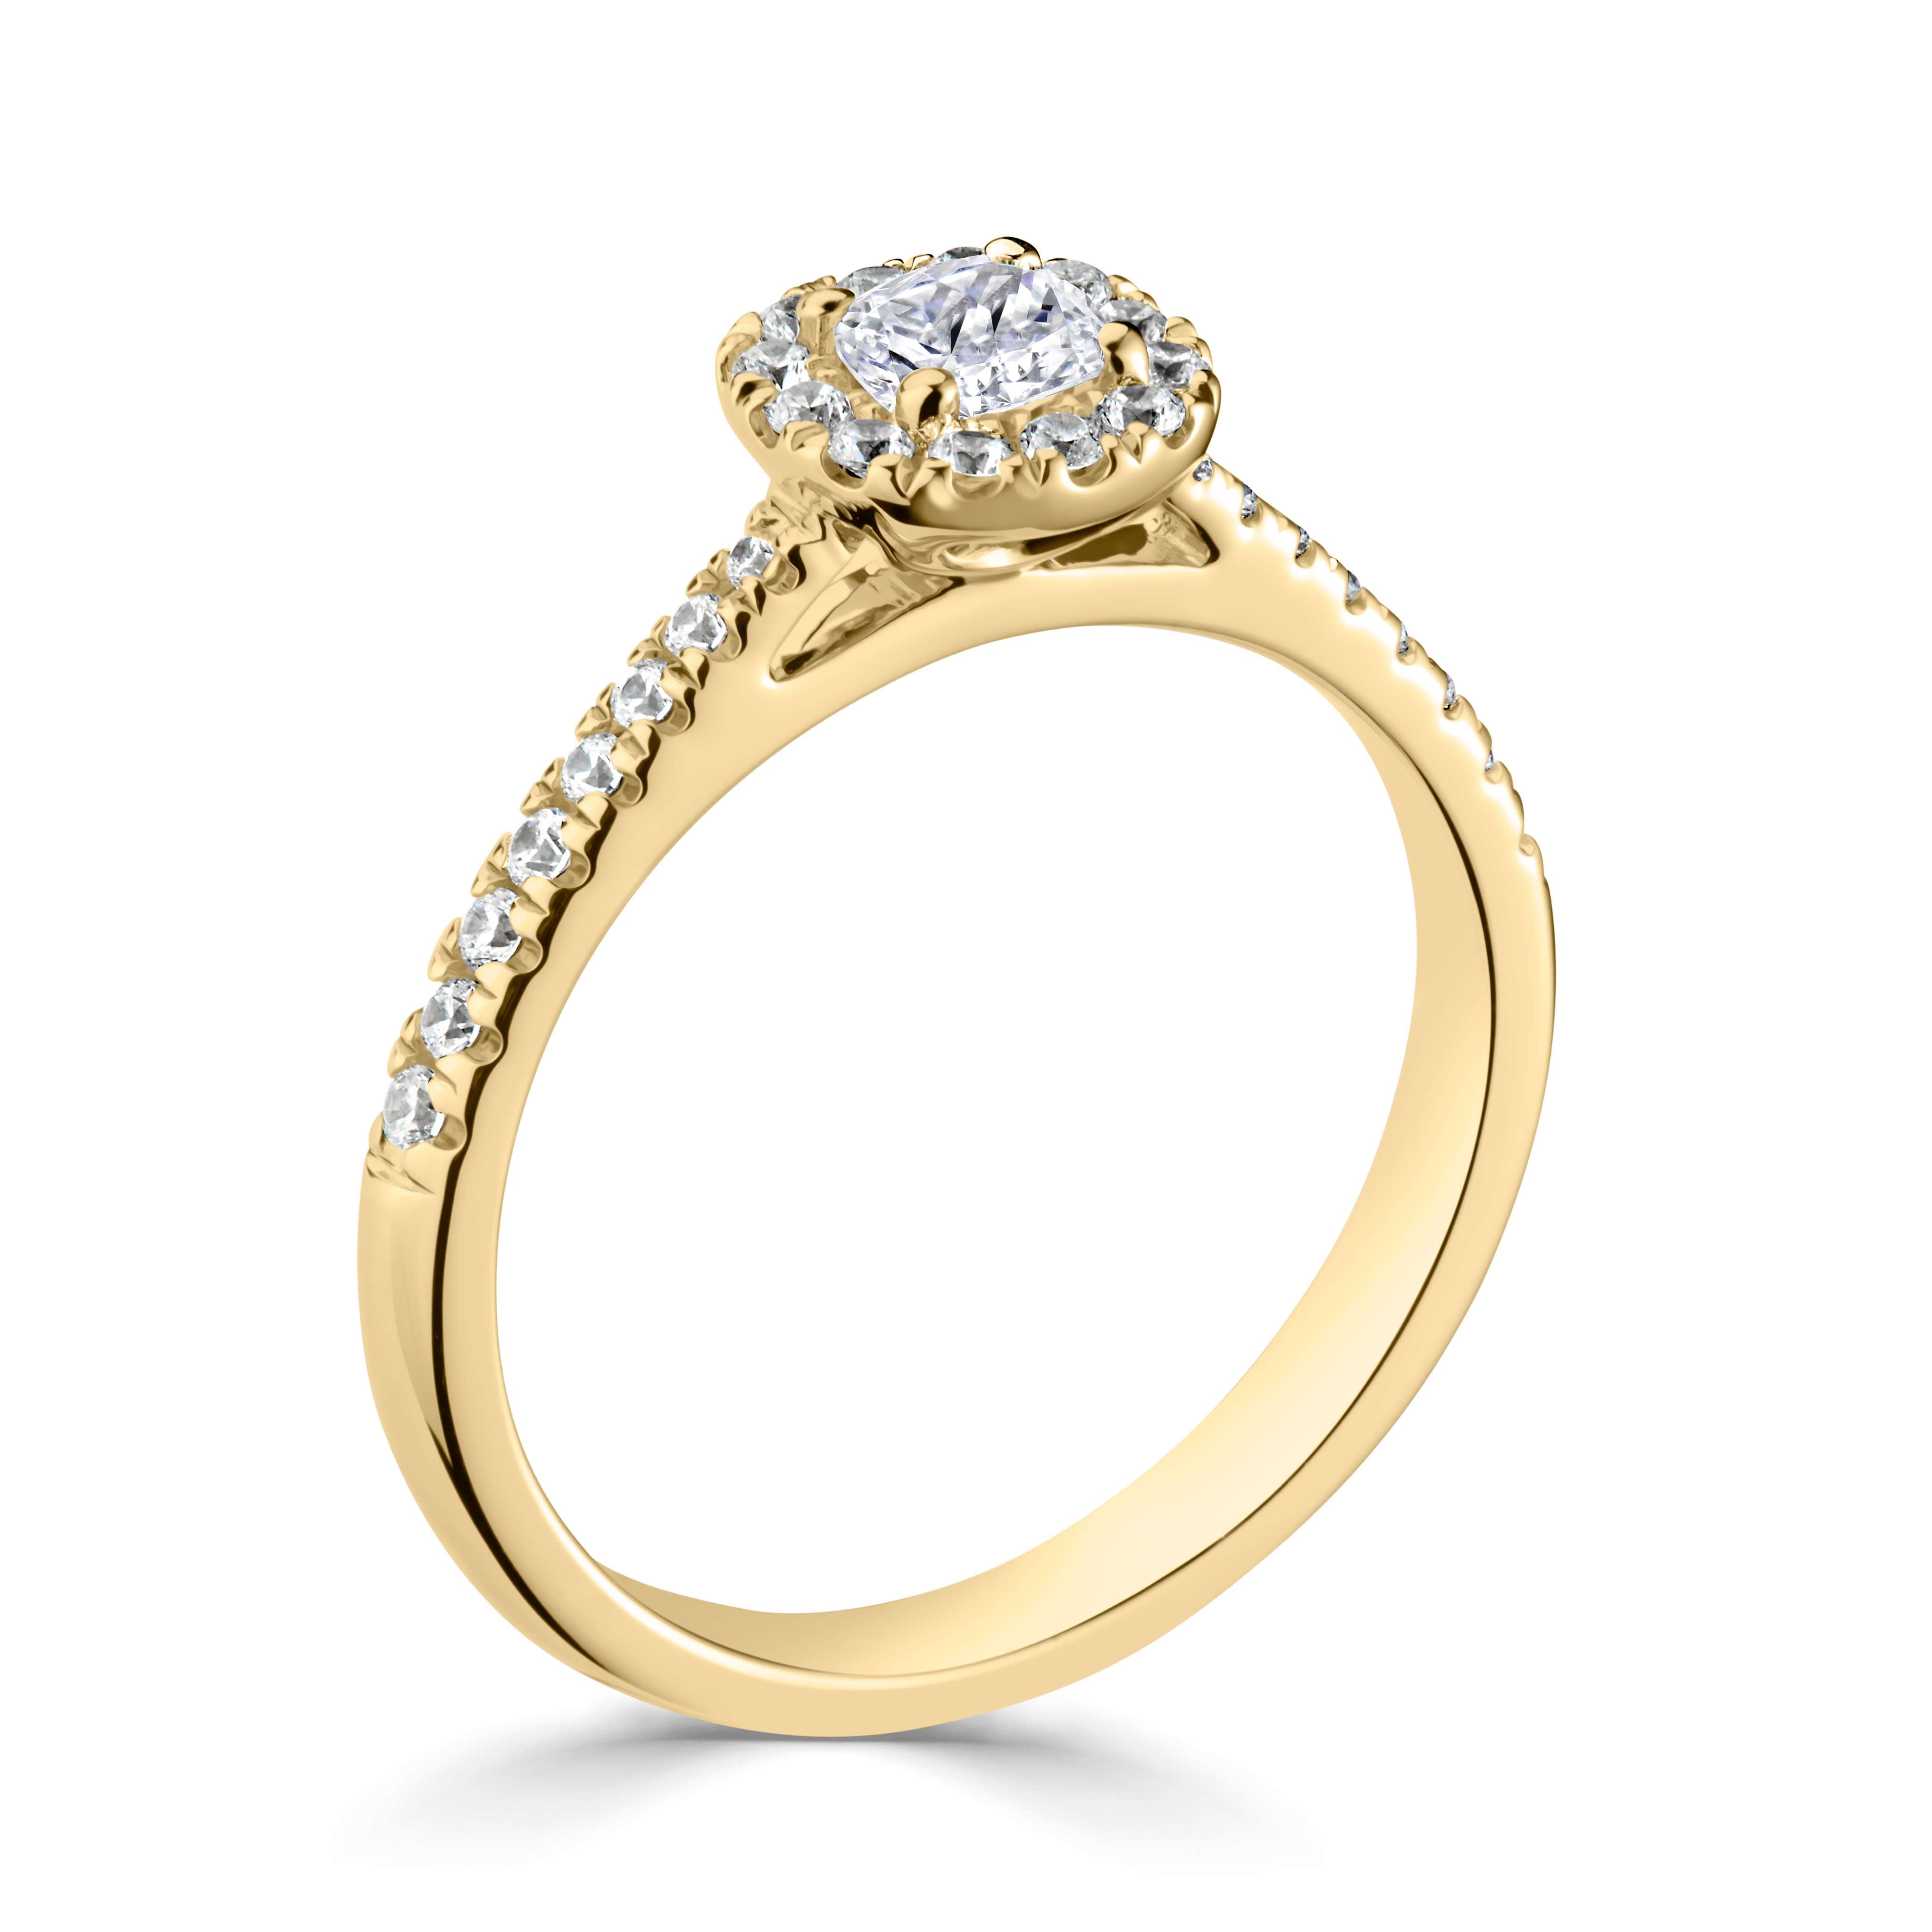 Camryn *Select a Cushion Cut Diamond 0.25ct or above